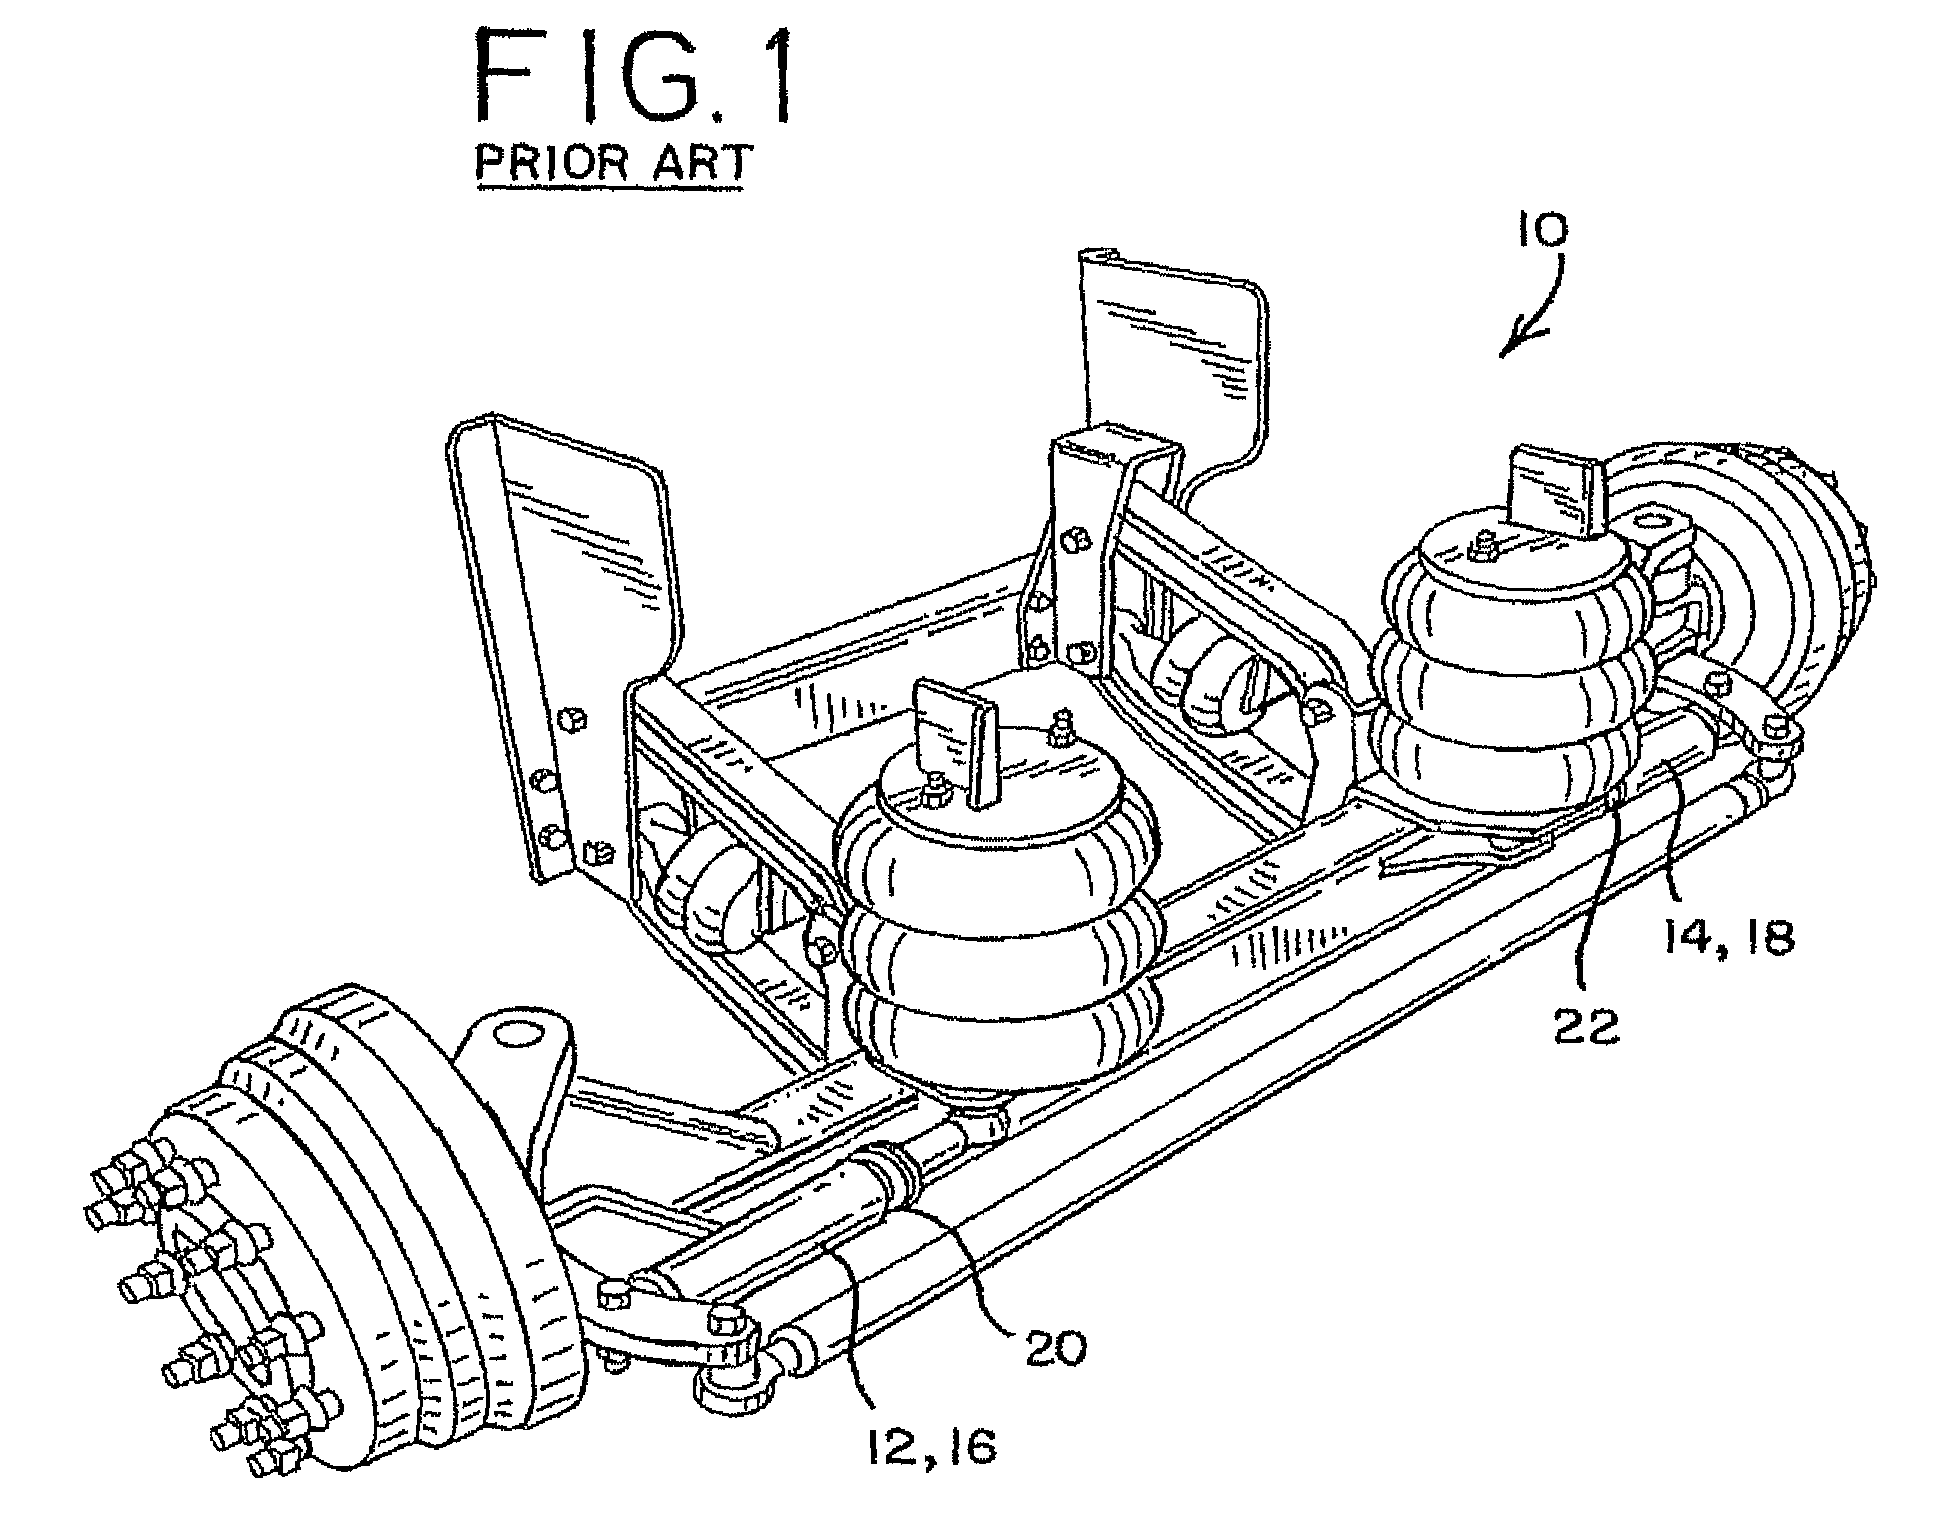 Self-steering axle suspension system having a rotary stabilizer mounted at a pivot joint associated with a tie rod